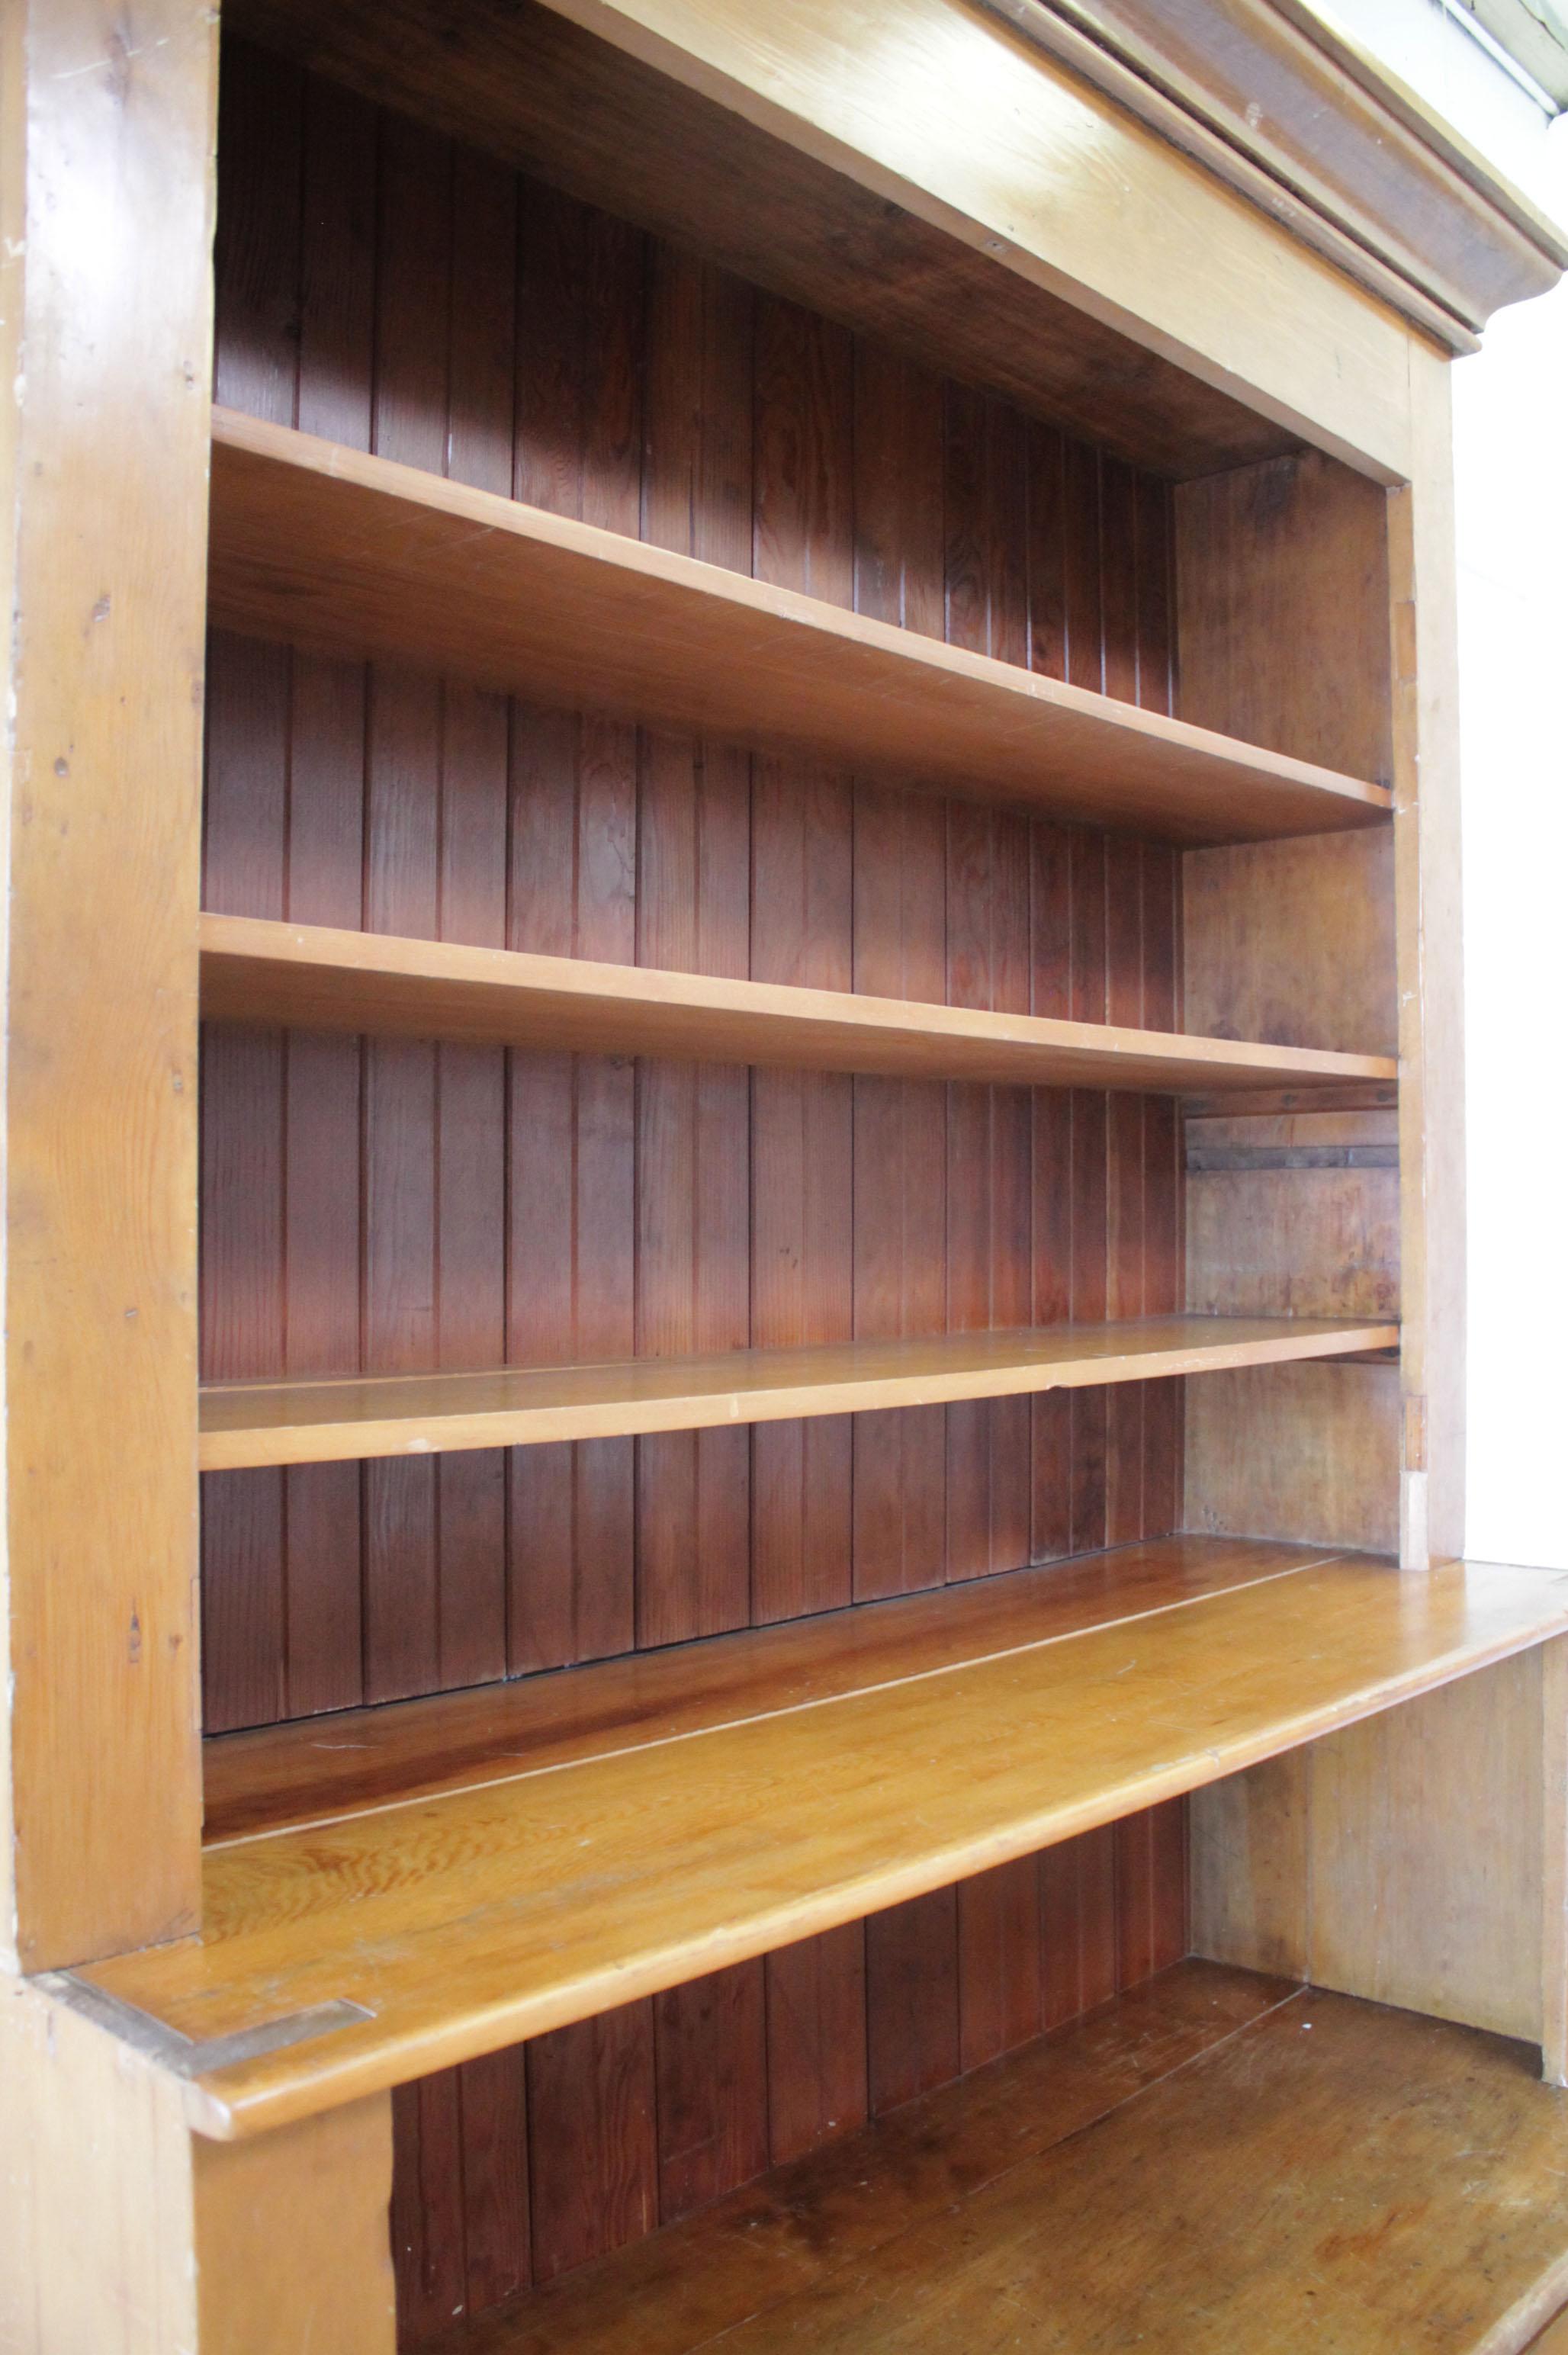 Large American Pine Country Cupboard with Bookshelf In Good Condition For Sale In Brea, CA